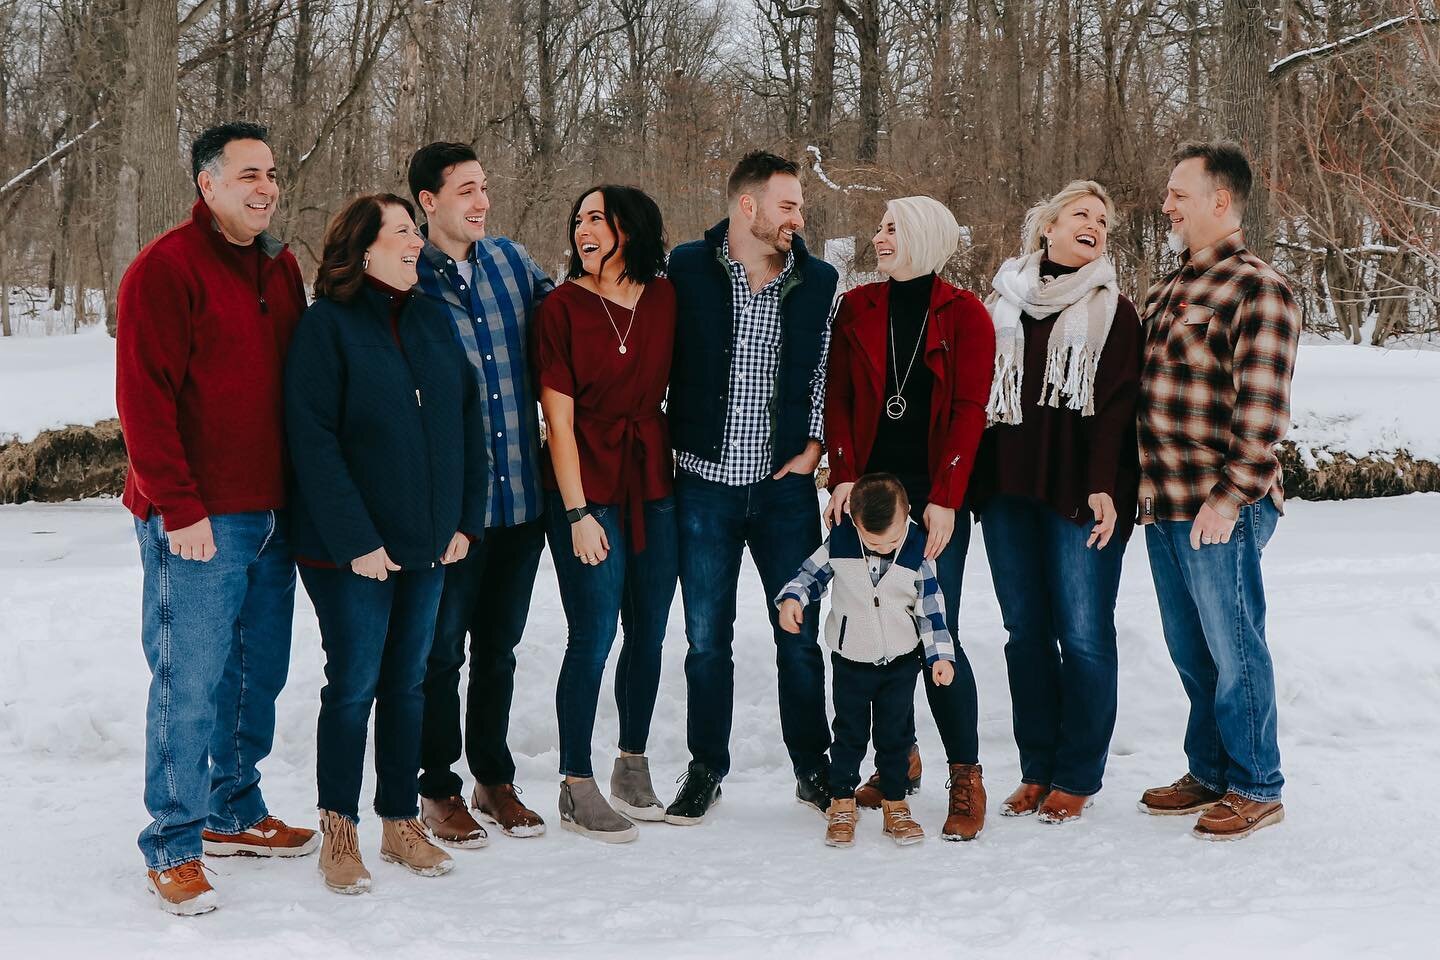 Who needs family photos before this beautiful snow is gone?!